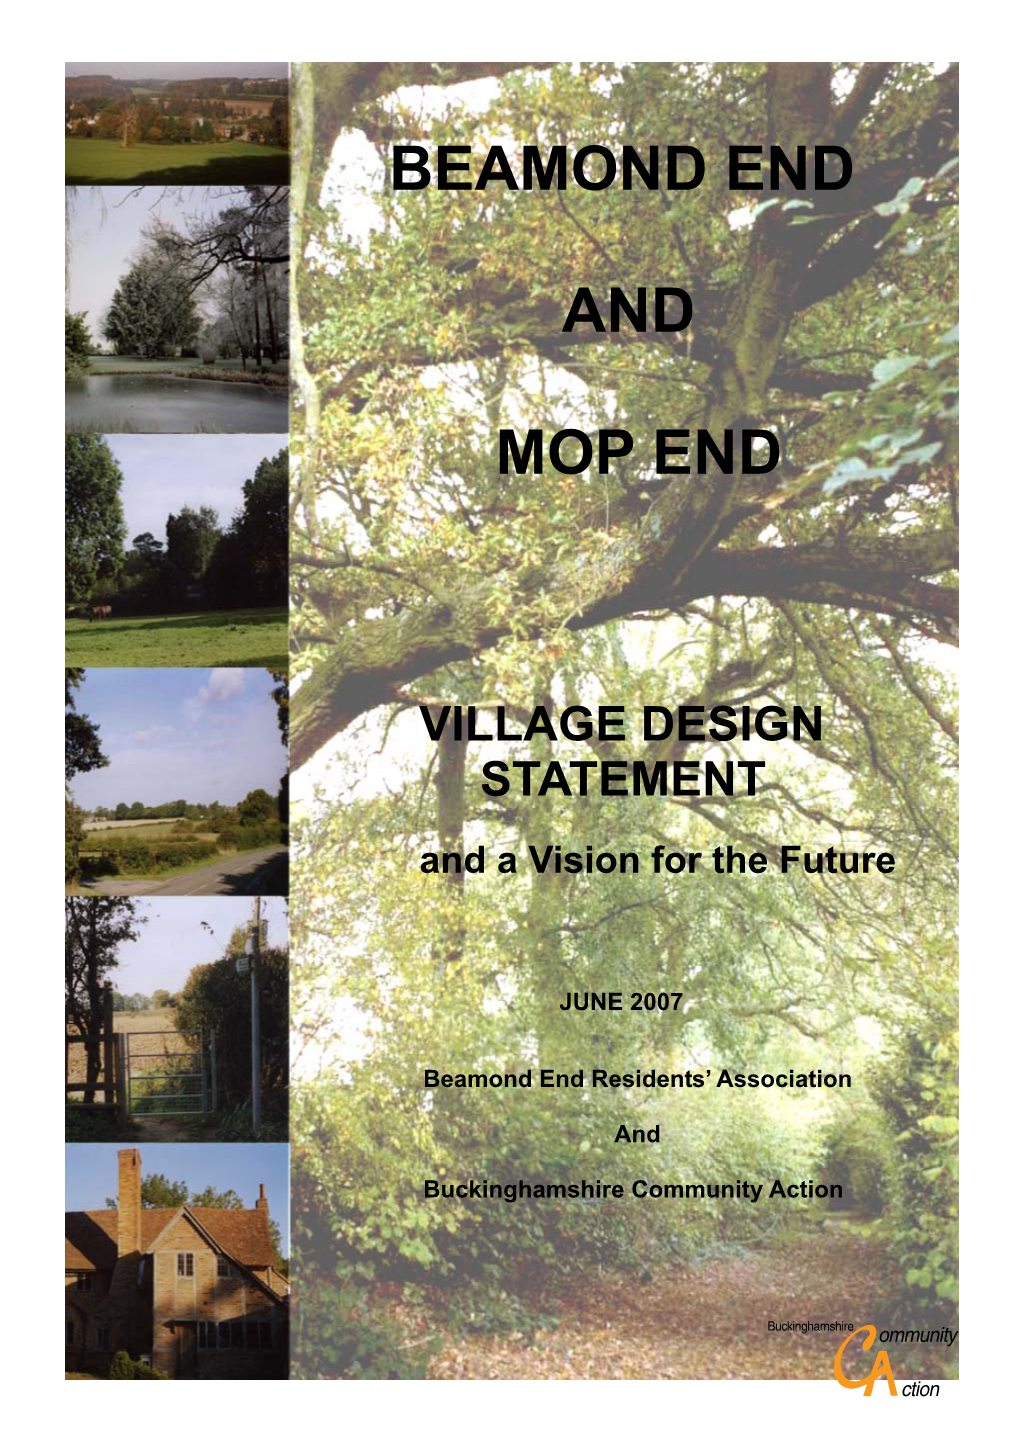 Beamond End and Mop End